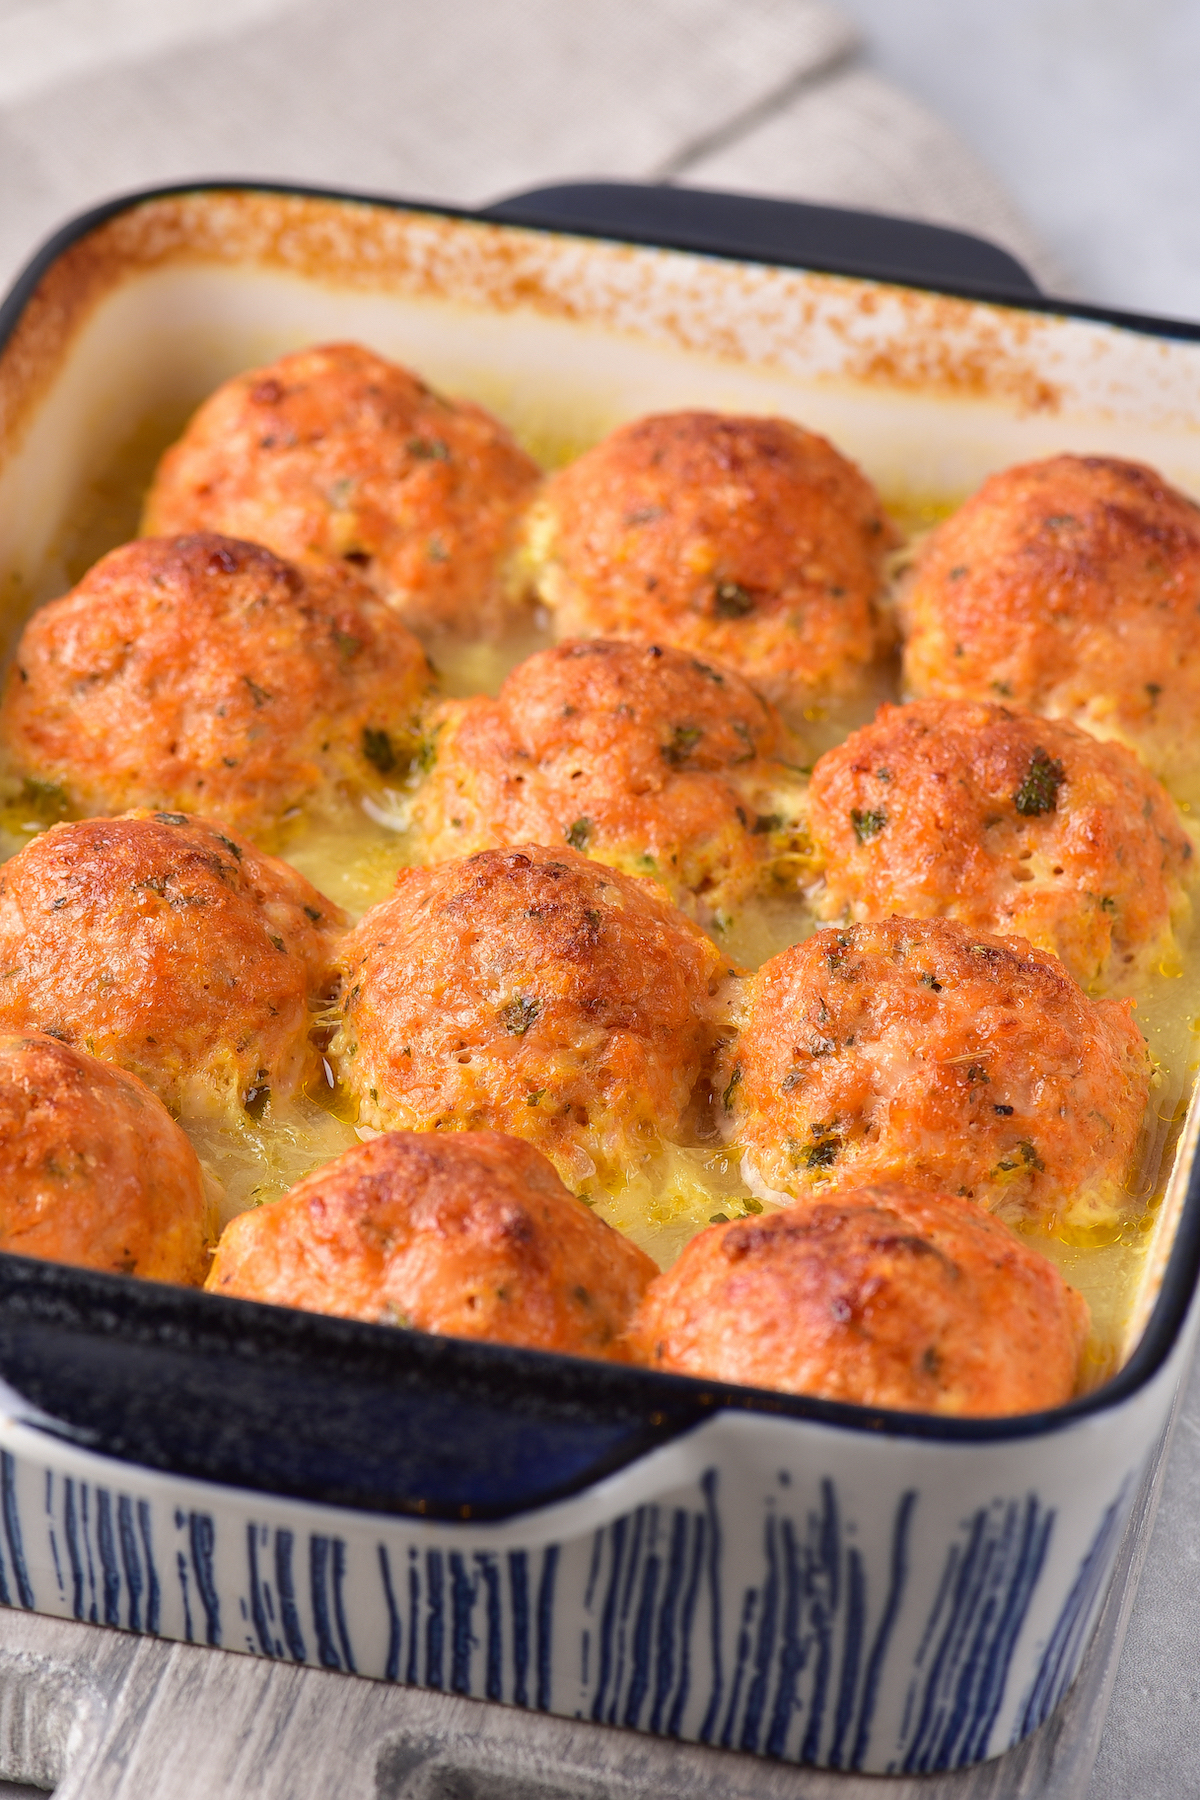 the completed chicken meatballs recipe